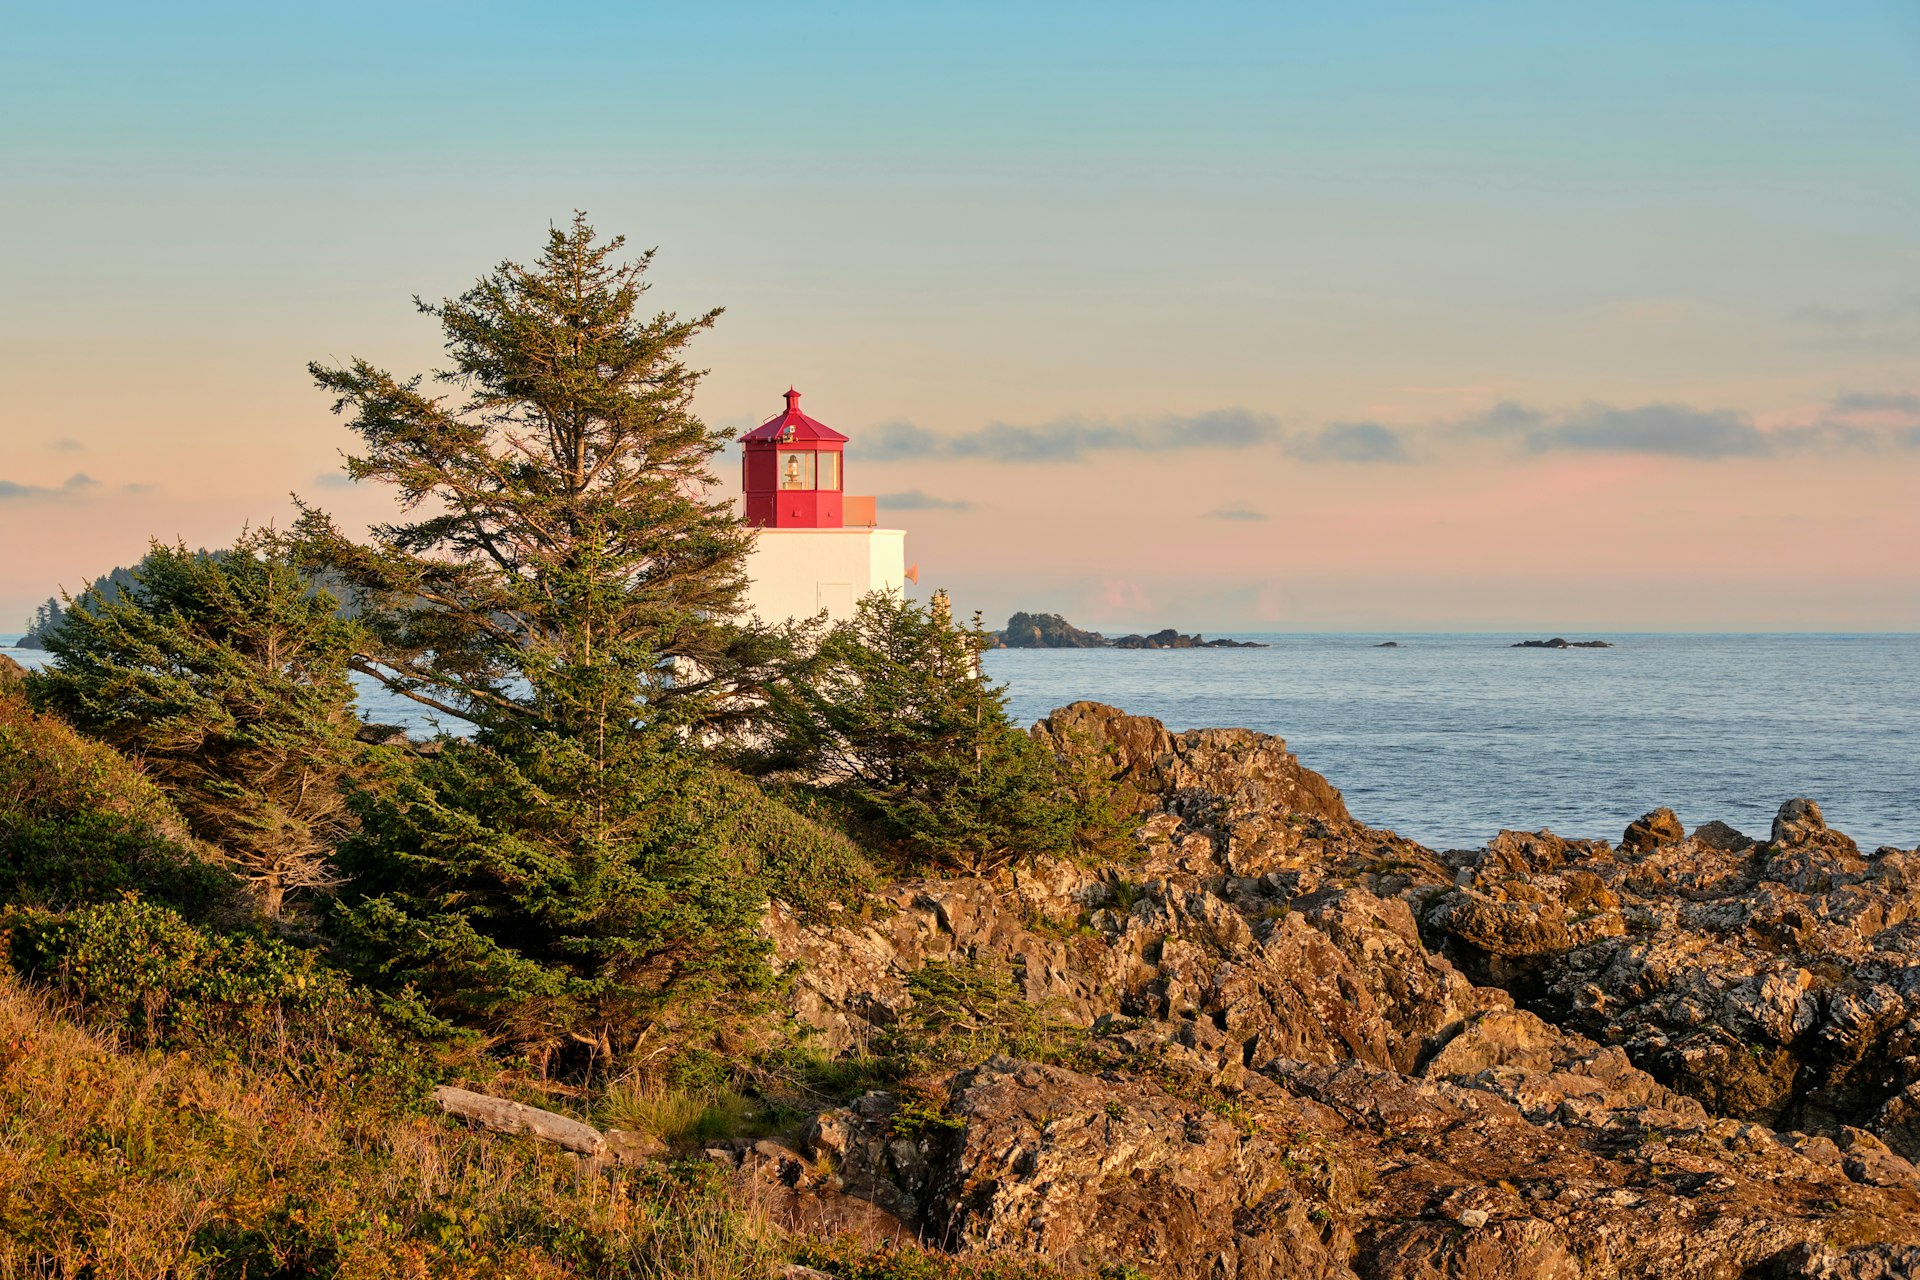 The lighthouse on the Wild Pacific Trail in Ucluelet, Canada